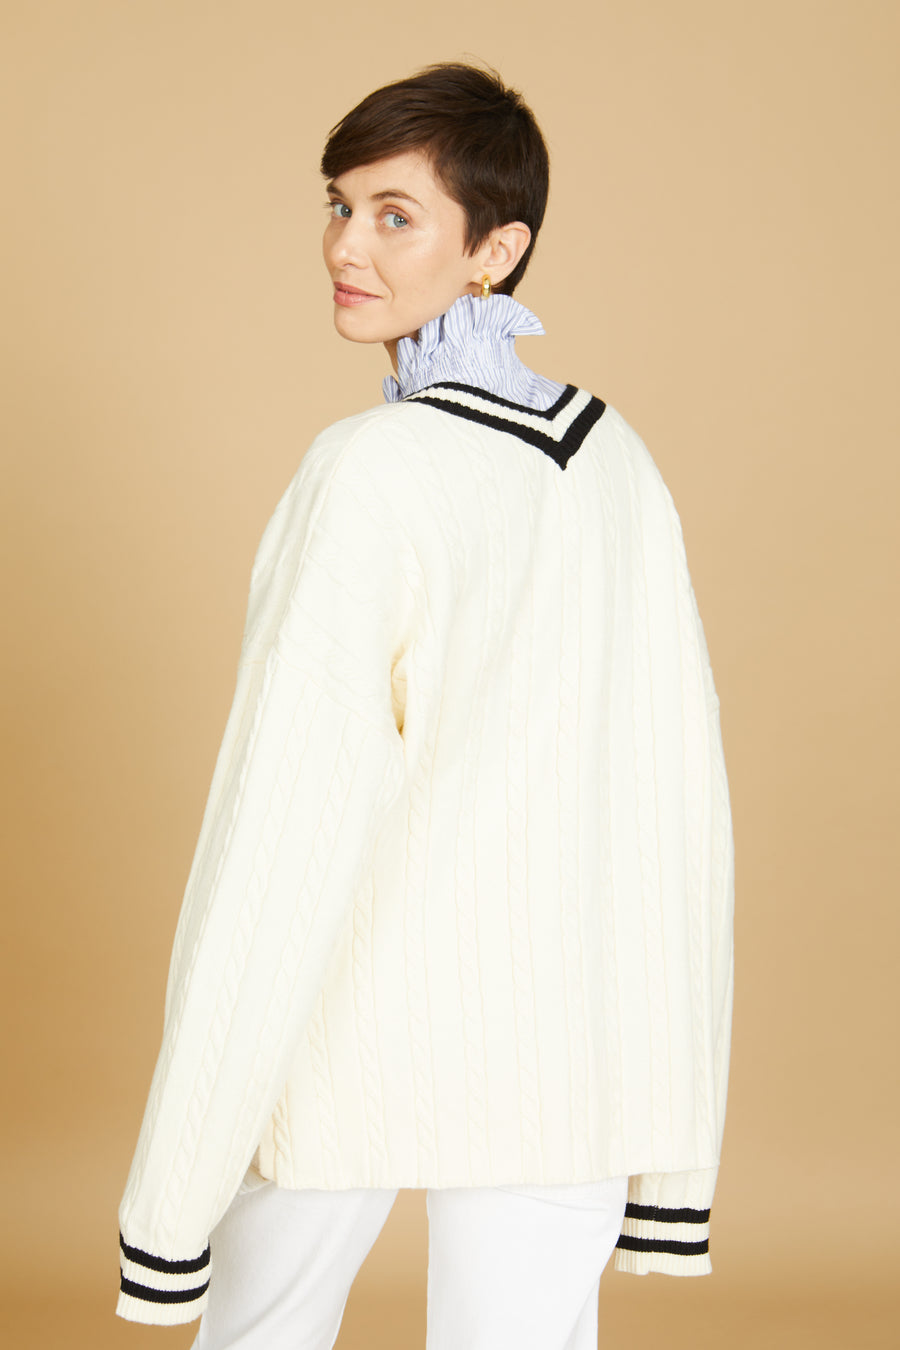 No Srcipt image - Images of 3 of 7 oversized v neck sweater, exaggerated long sleeve, cream cable knit, cream color with black accents, high-low hem length